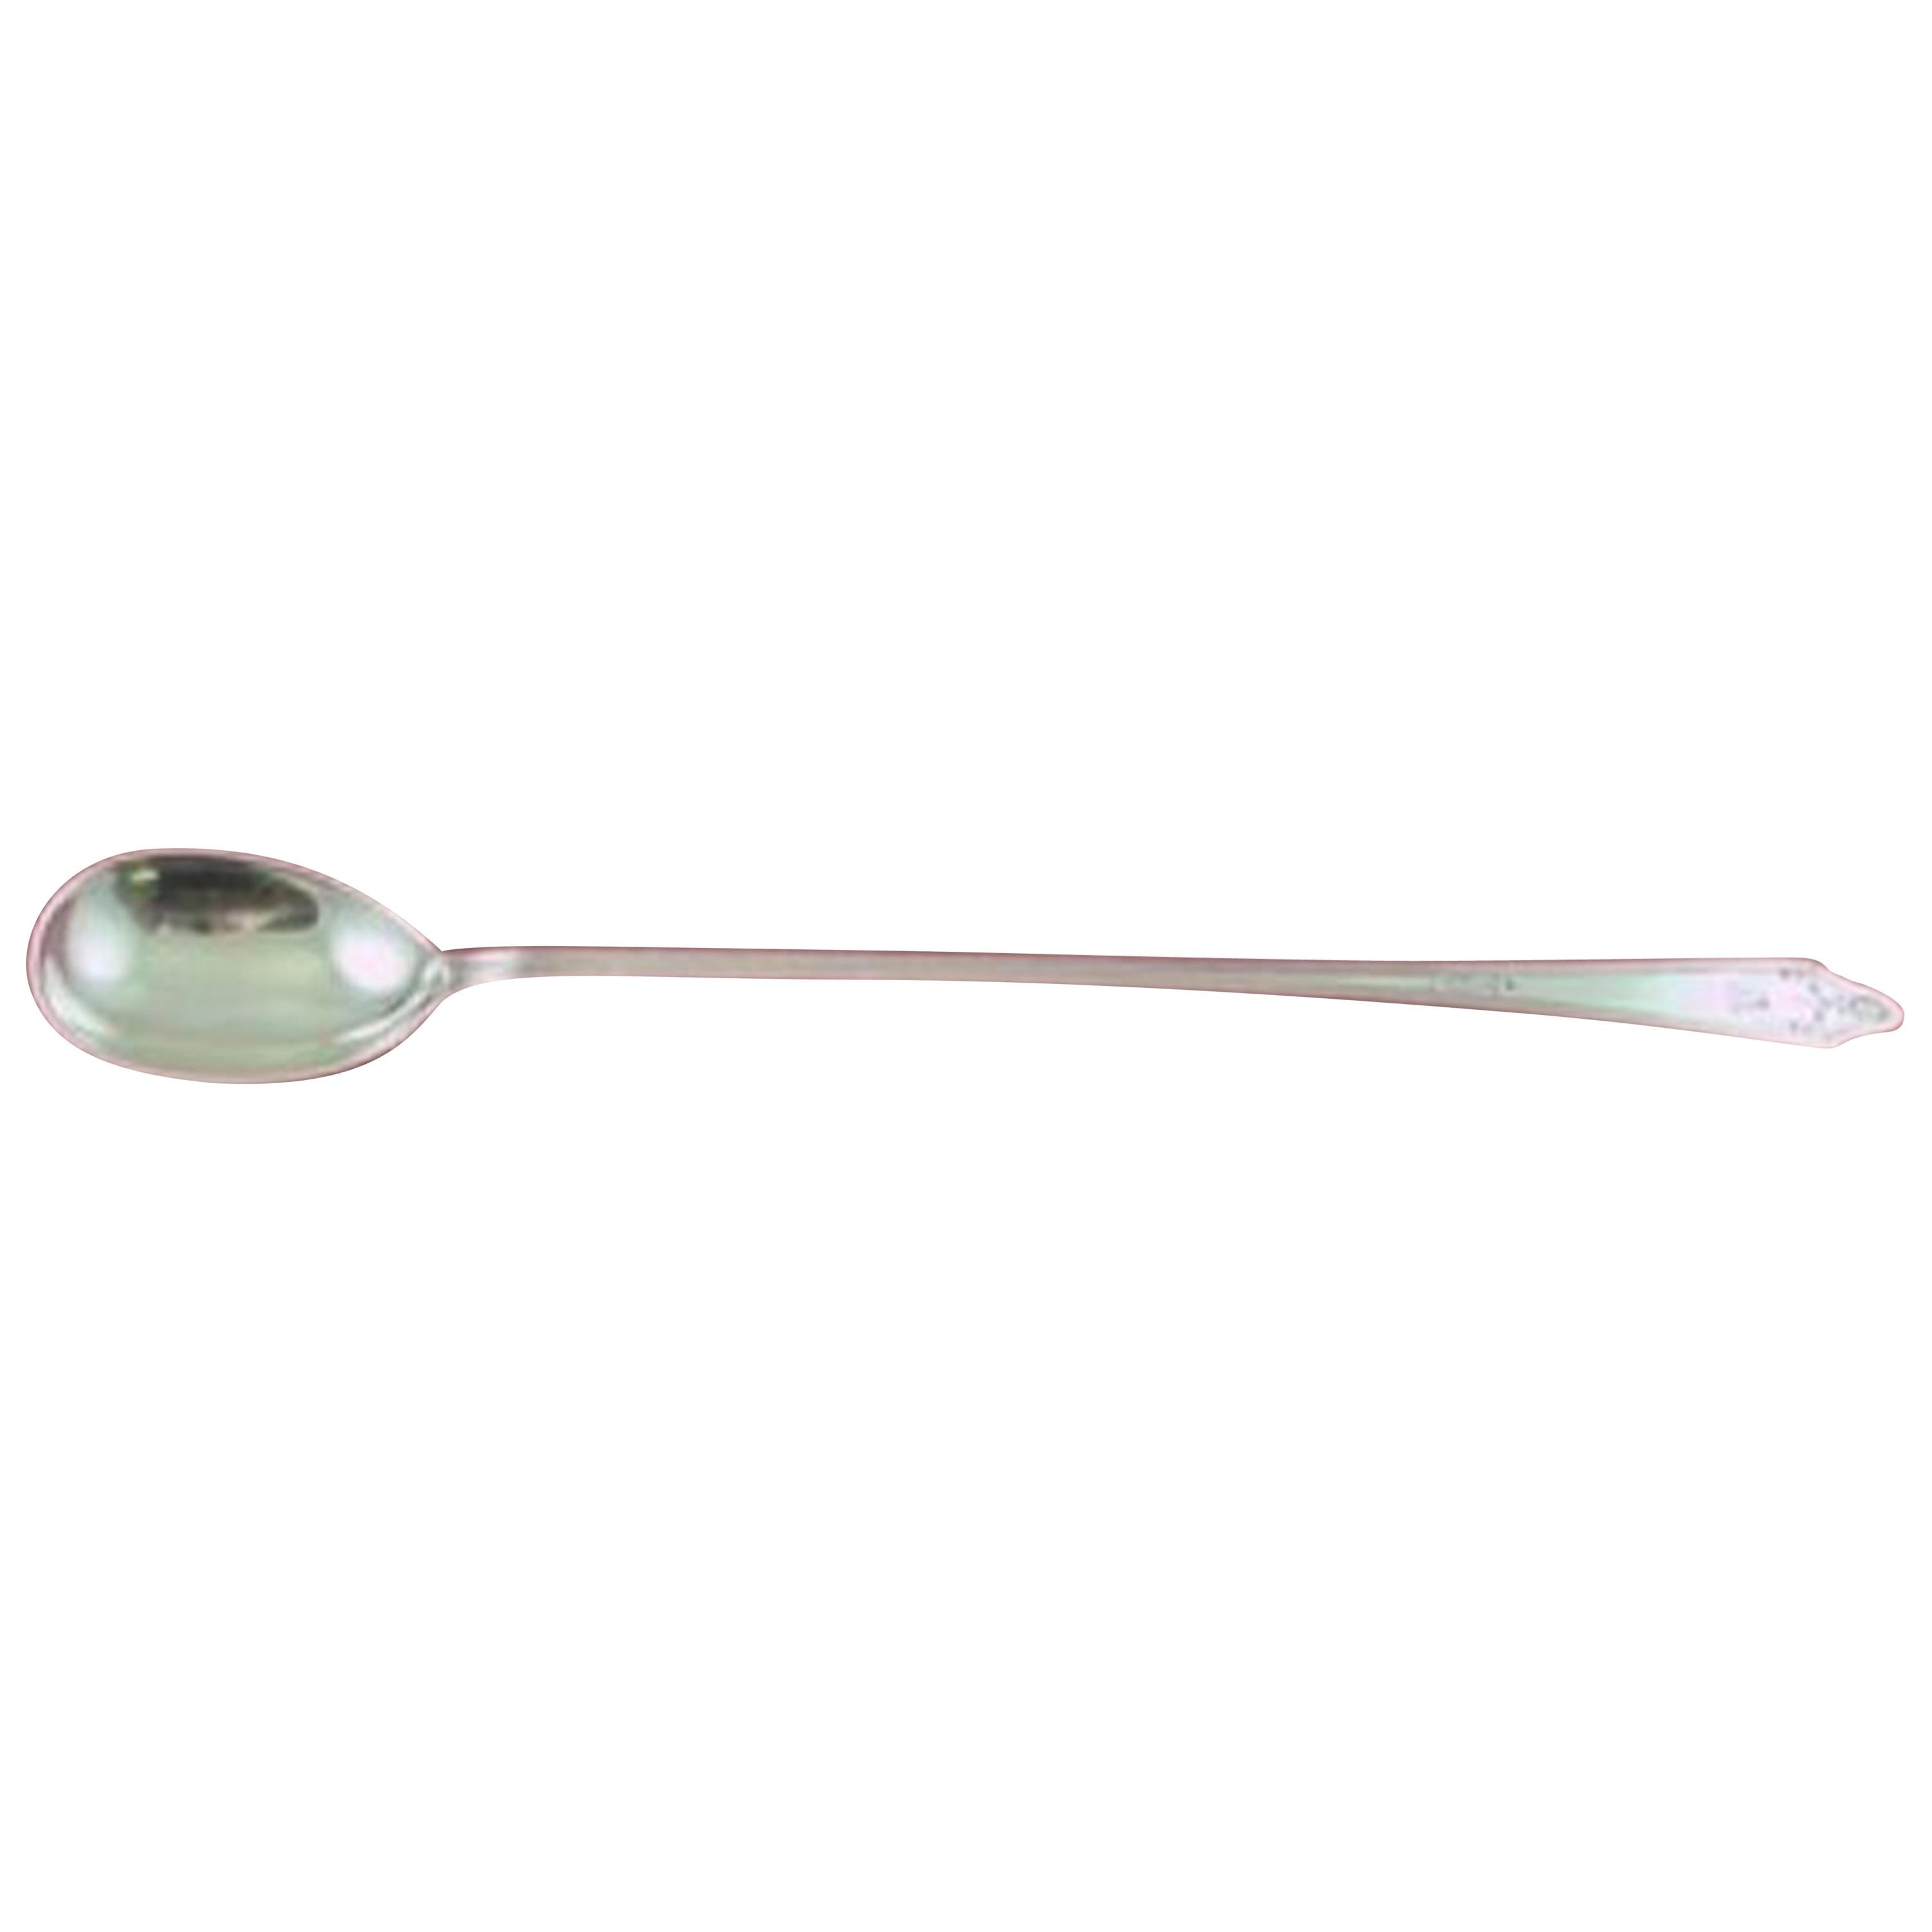 Clinton Engraved by Tiffany & Co. Sterling Silver Iced Tea Spoon